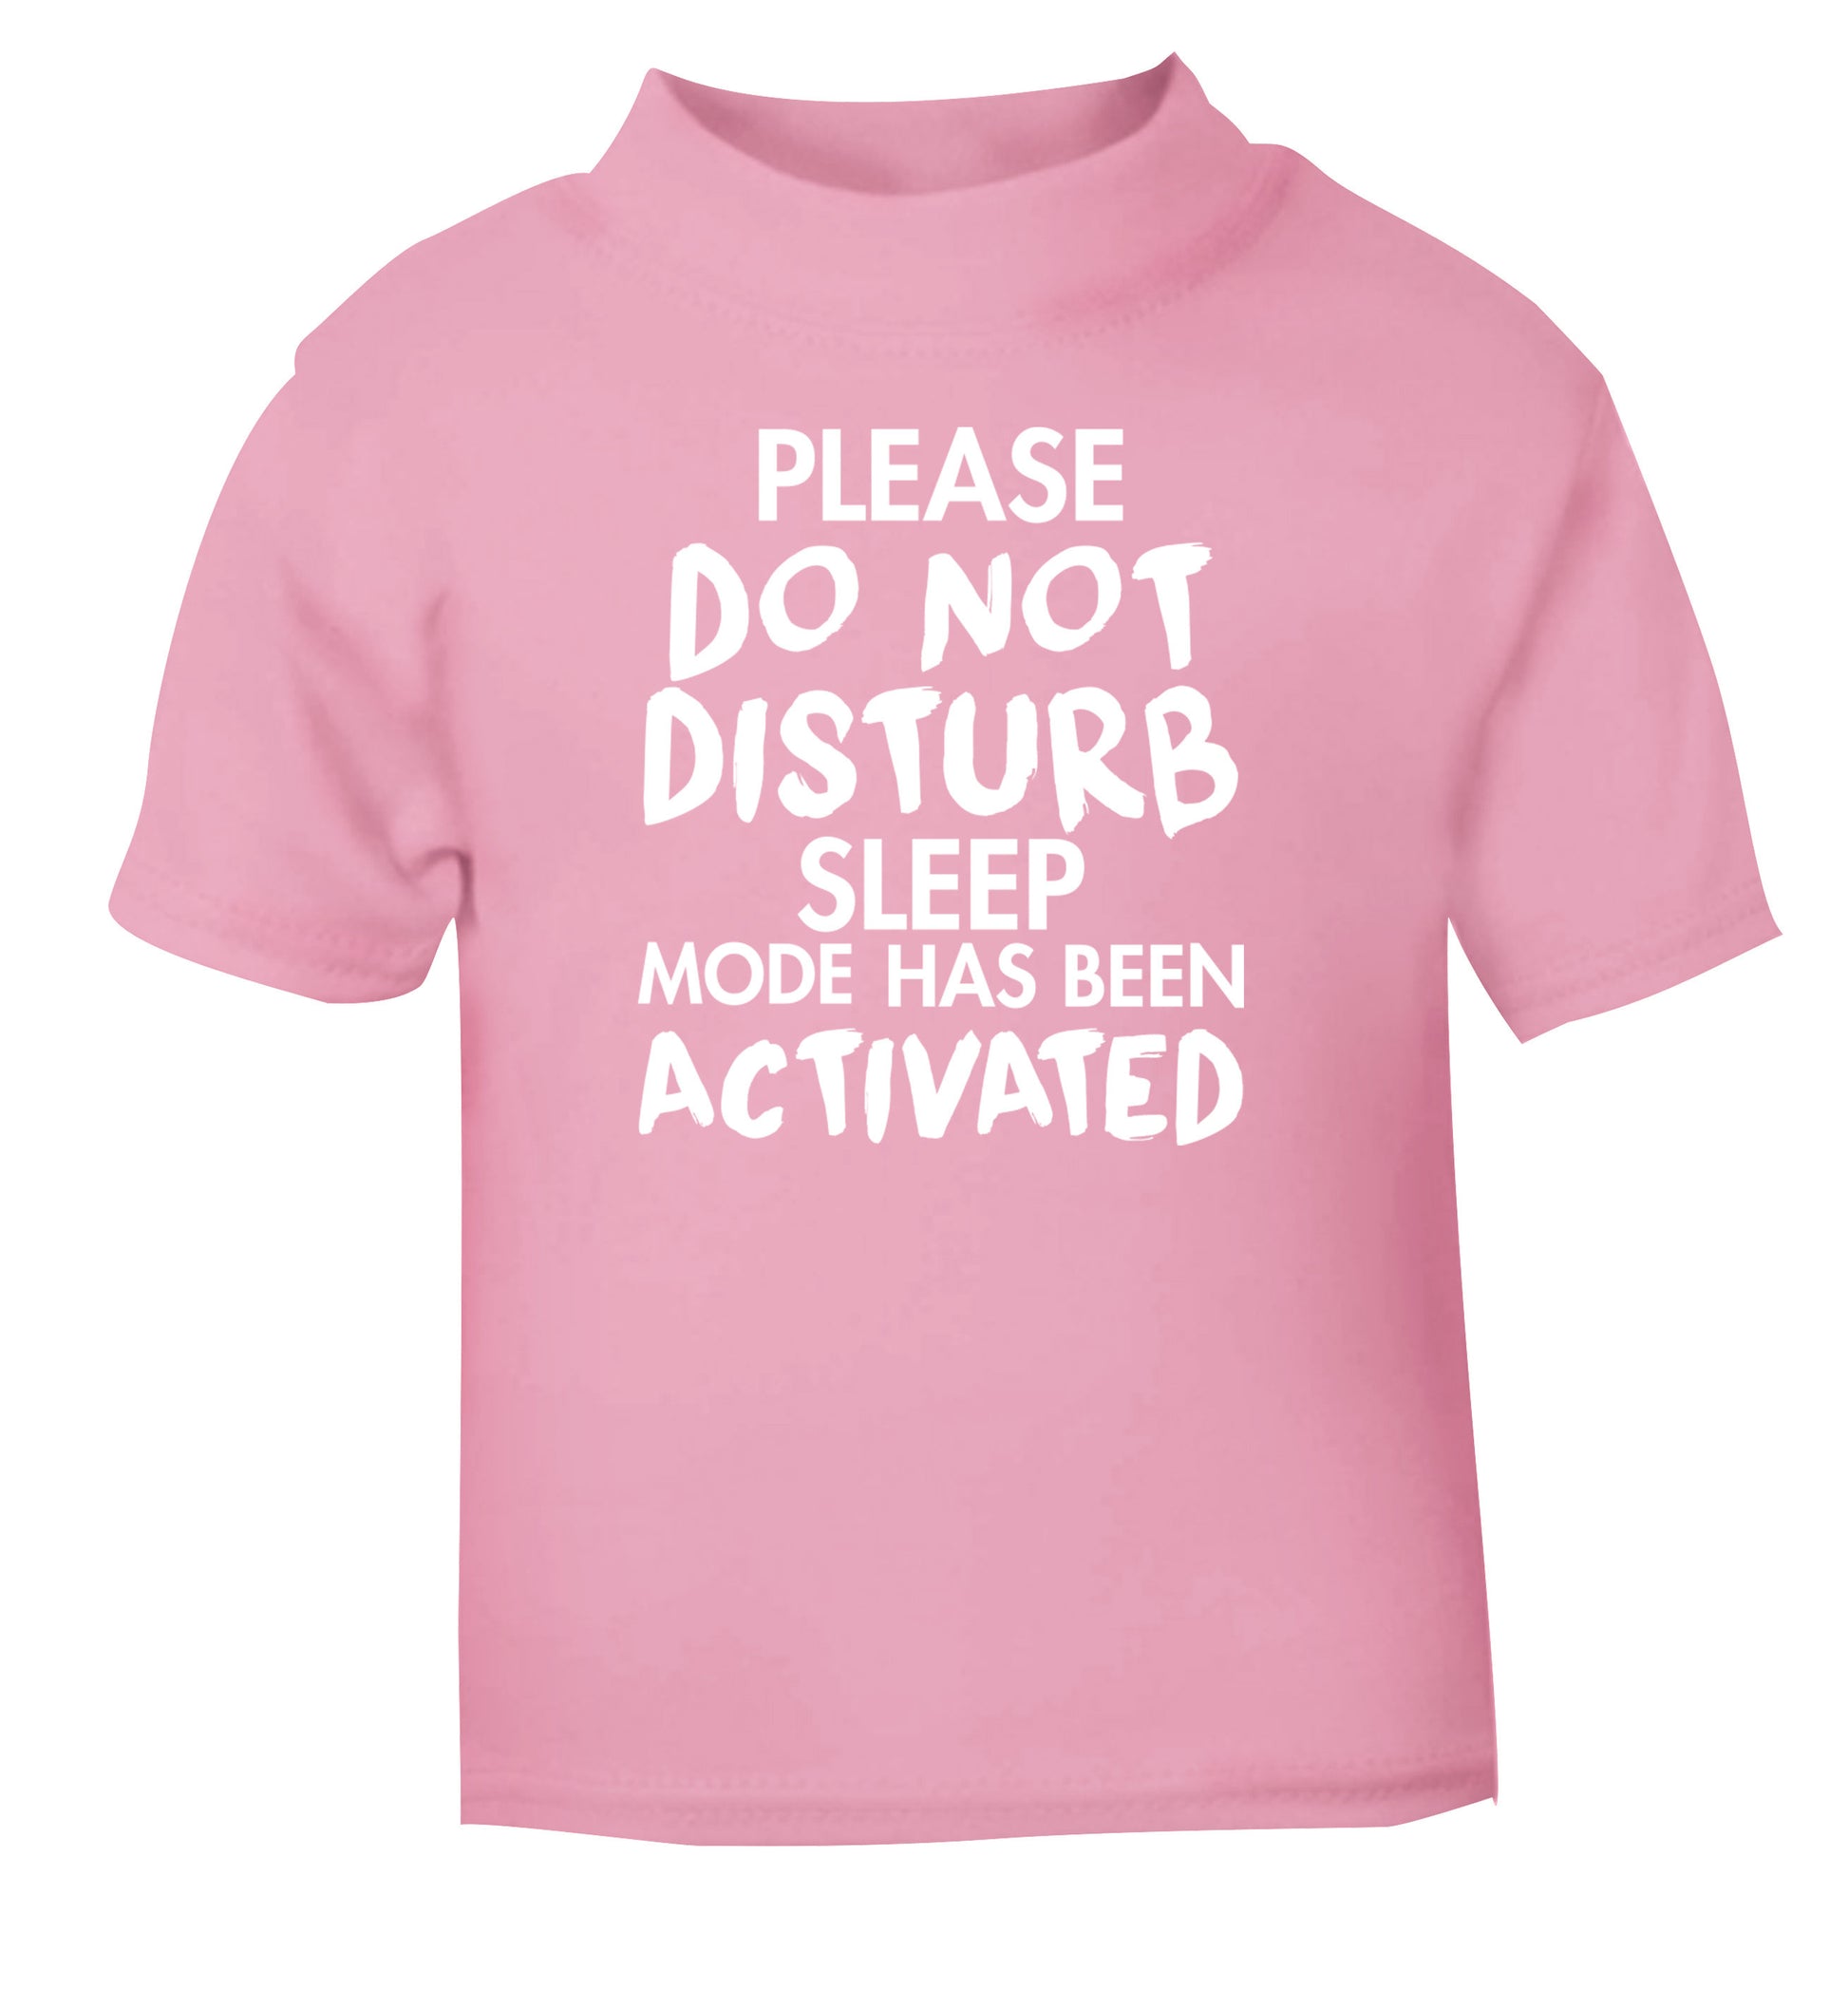 Please do not disturb sleeping mode has been activated light pink Baby Toddler Tshirt 2 Years